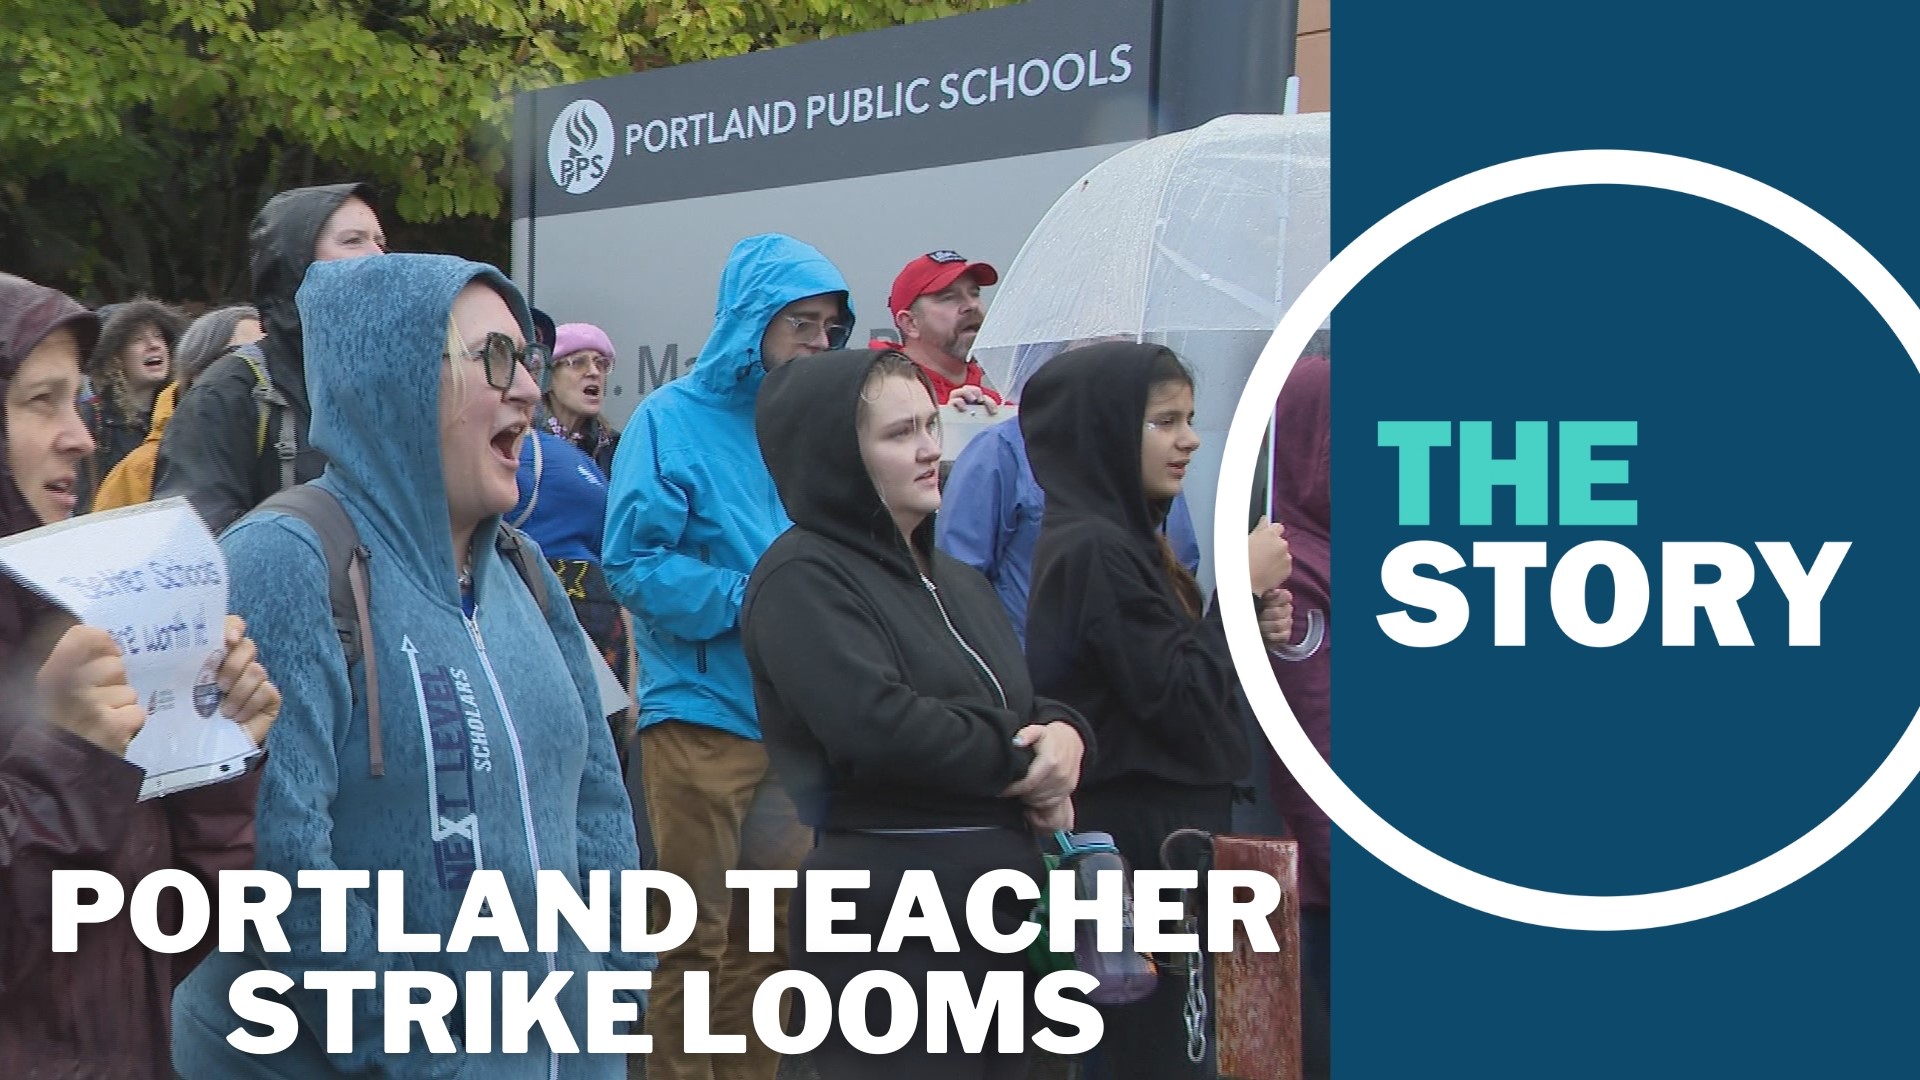 The teachers union said that a strike will begin next Wednesday, Nov. 1, if the district does not meet their demands for a new three-year contract.